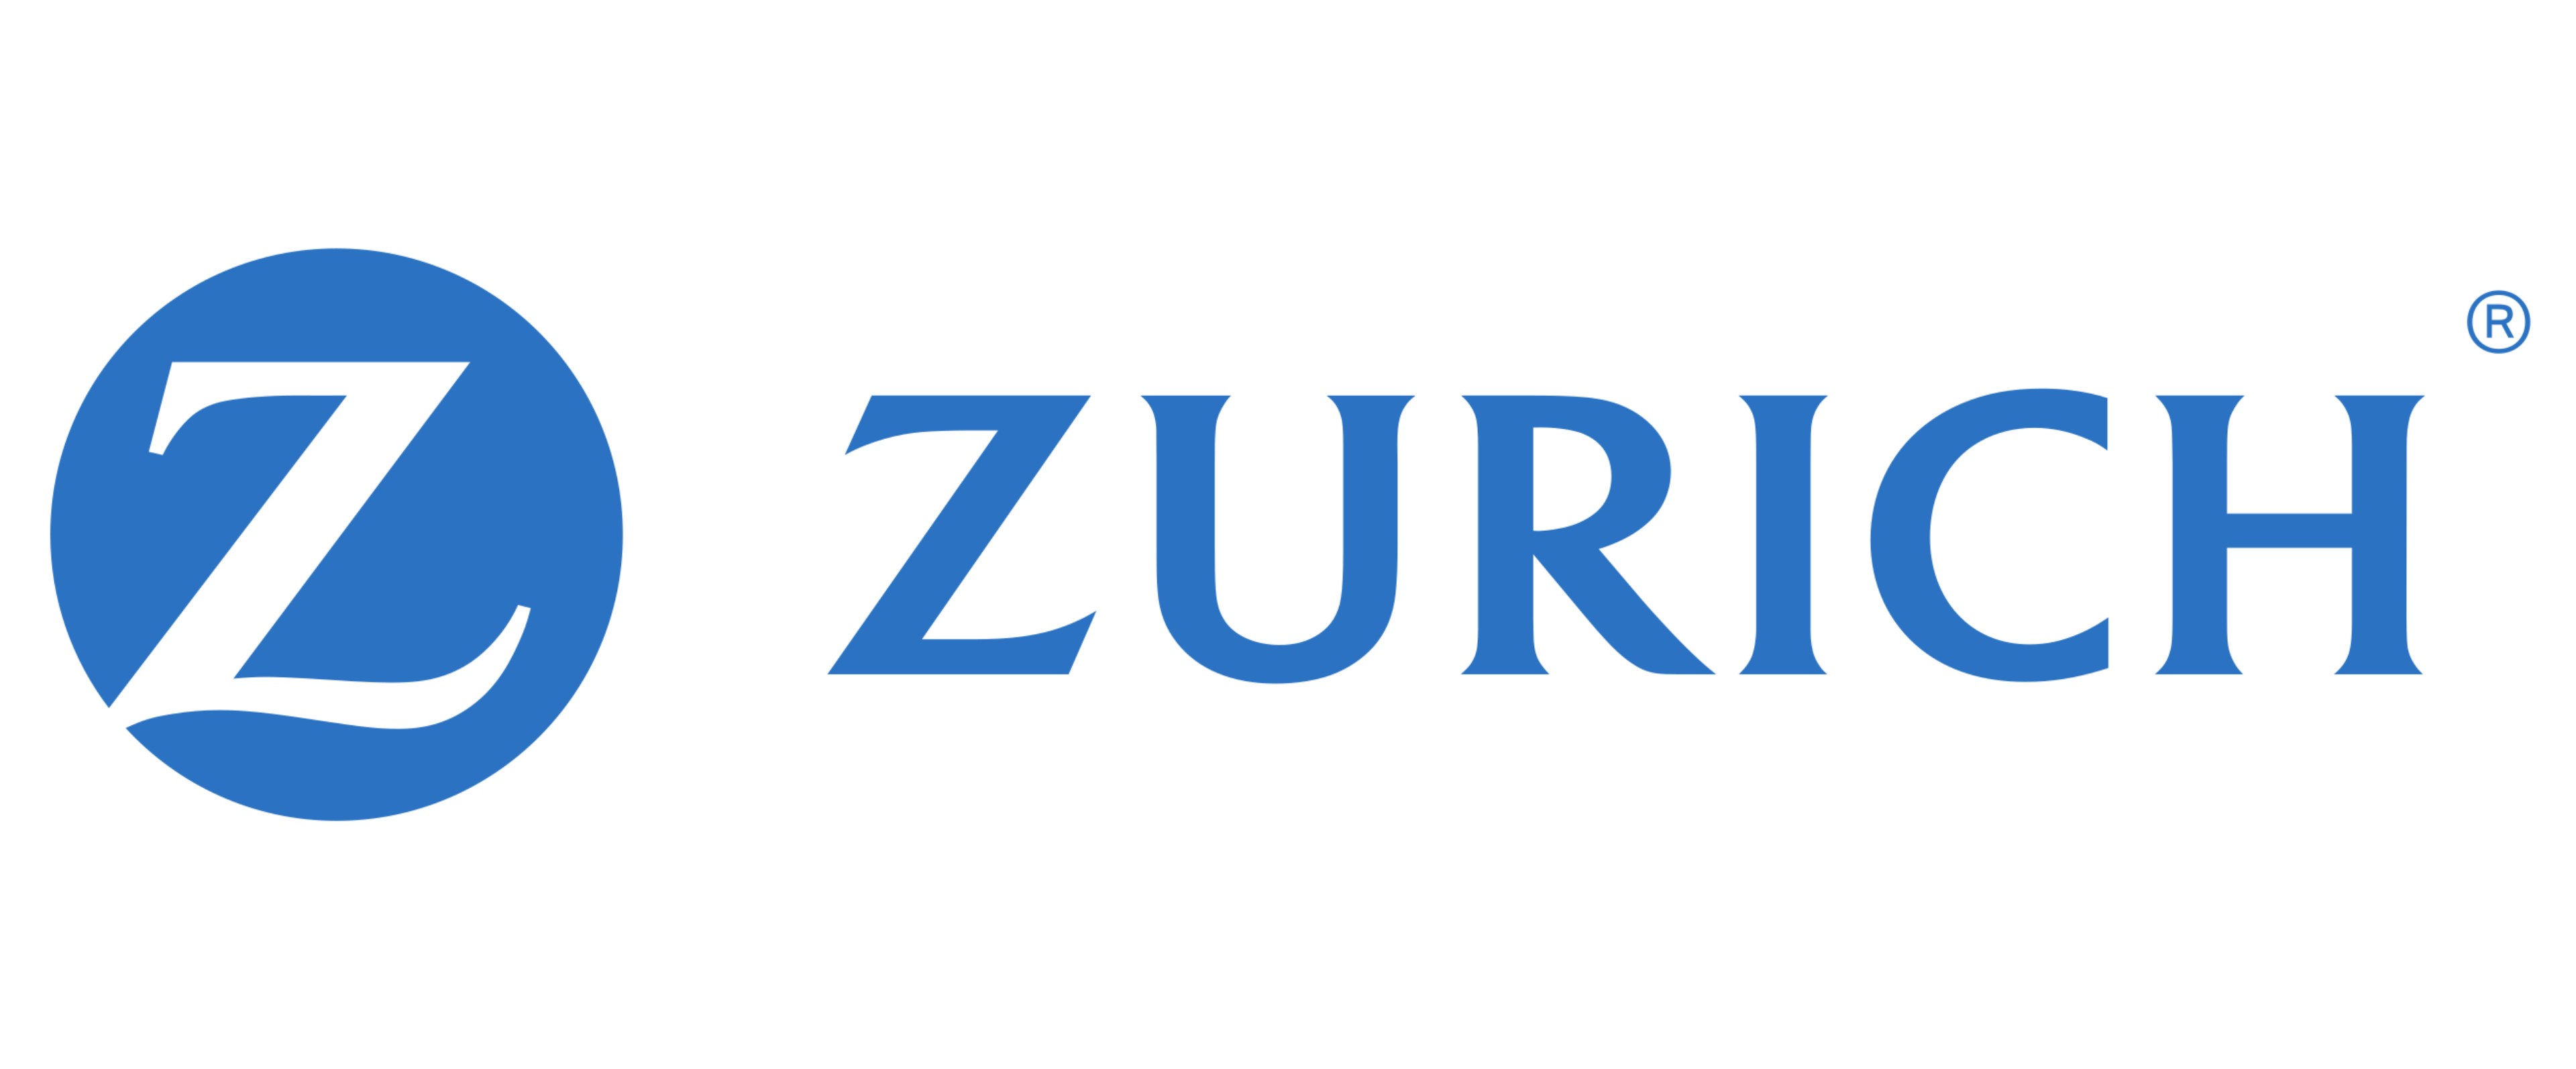 logo for the company Zurich